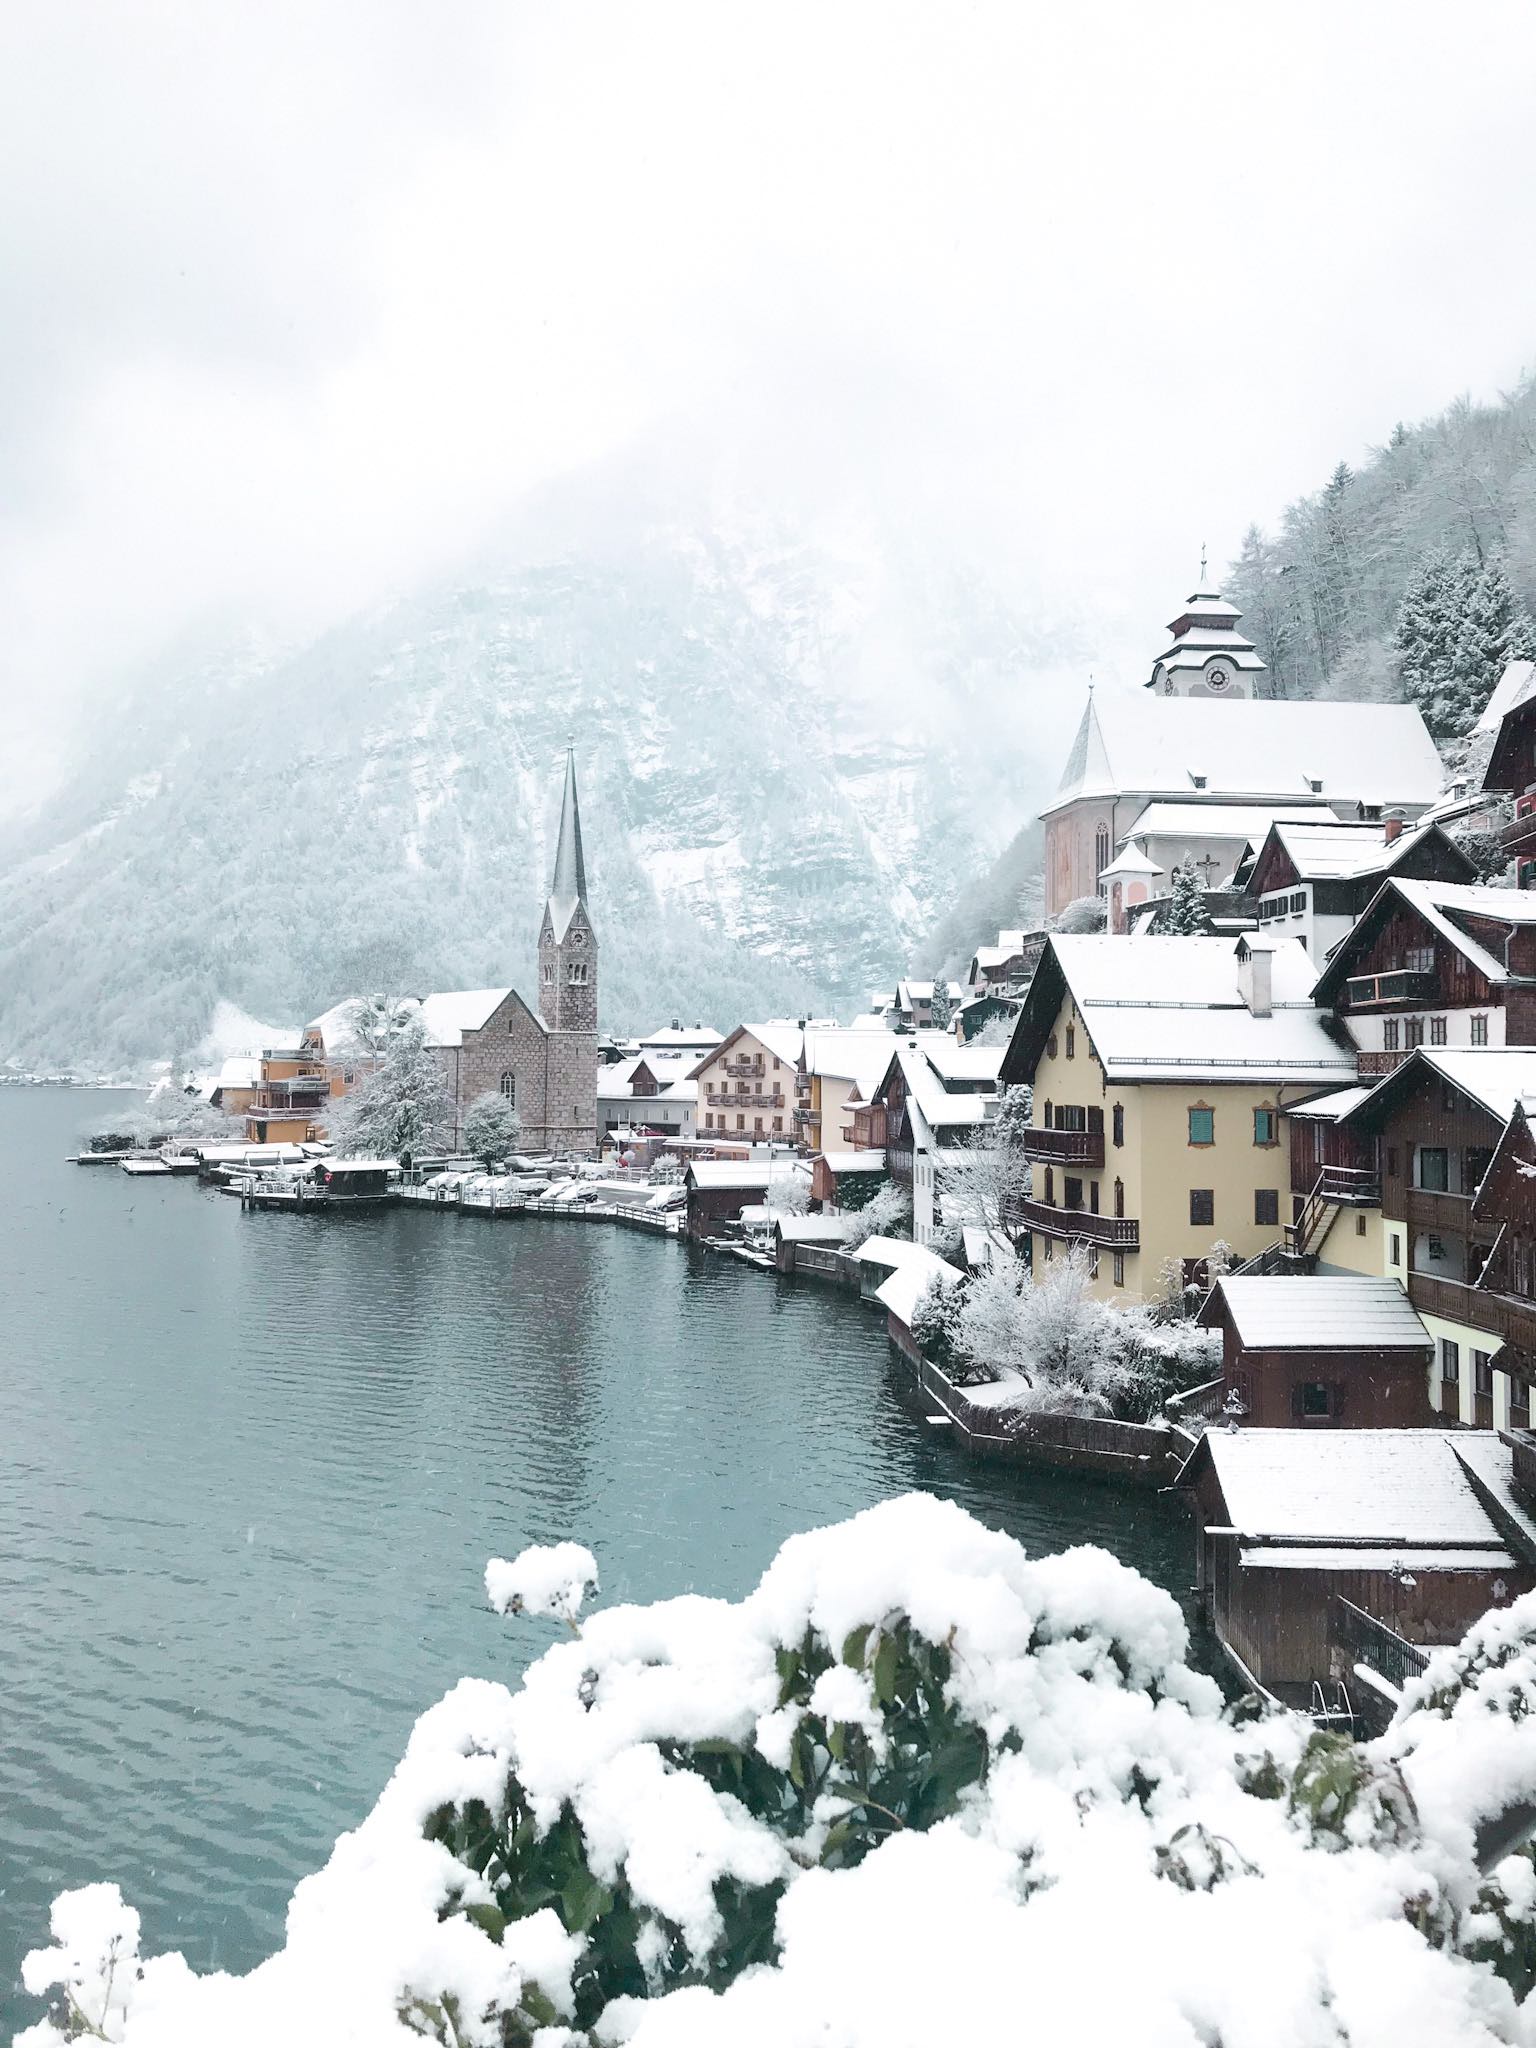 Hallstatt is one of the beautiful small towns in Europe as well as one of the best small Christmas markets in Europe